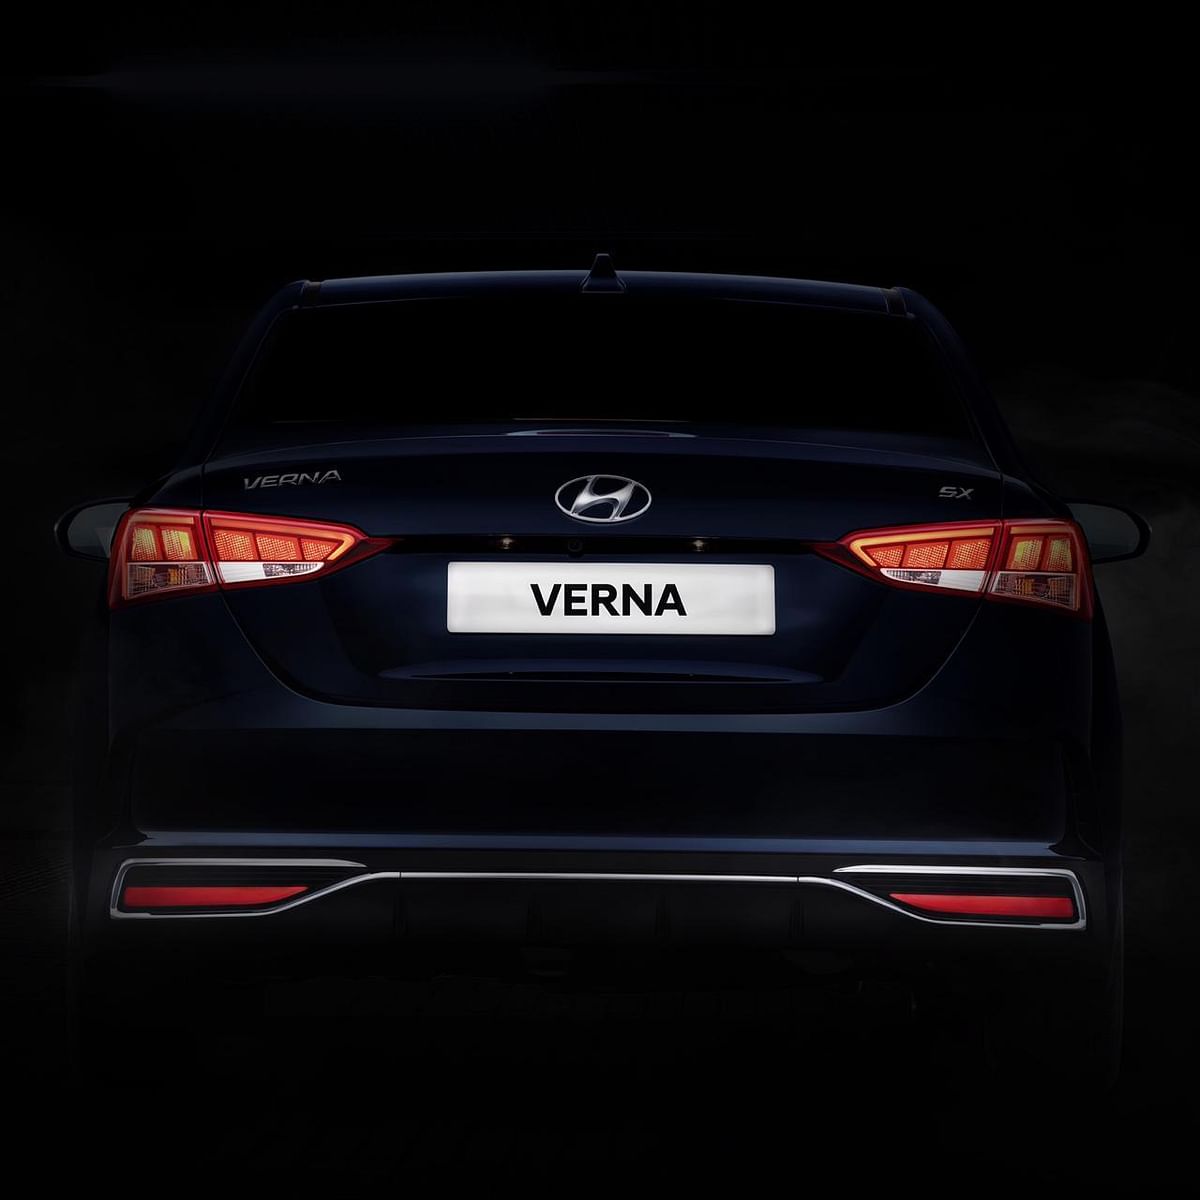 Hyundai will also offer the Verna with 1.5-litre petrol & diesel engines with manual and automatic gearbox options.